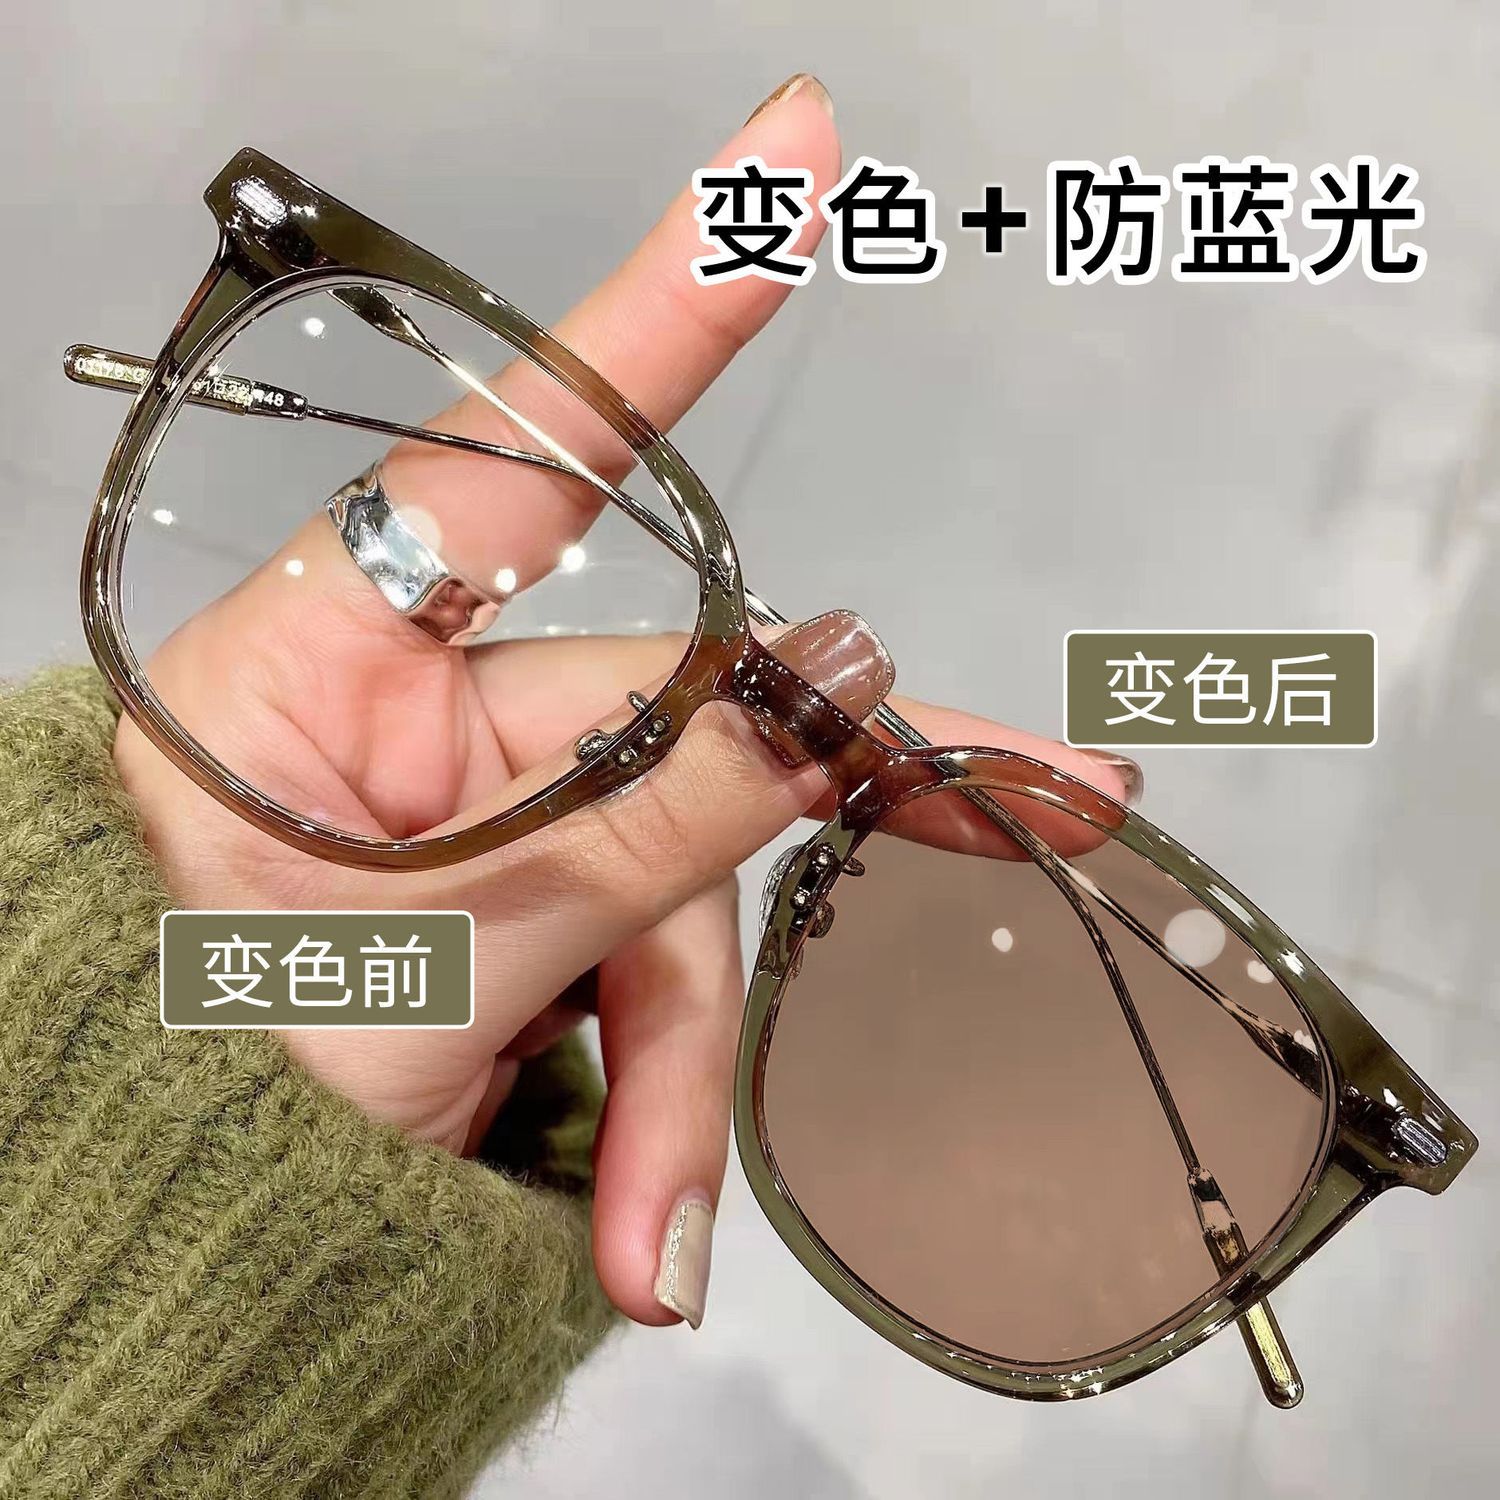 Square and round Face Glasses Color Changing Myopia with Diopter Female Korean Style Slimming UV Protection Anti Blue-Ray Glasses Frame Student Fashion